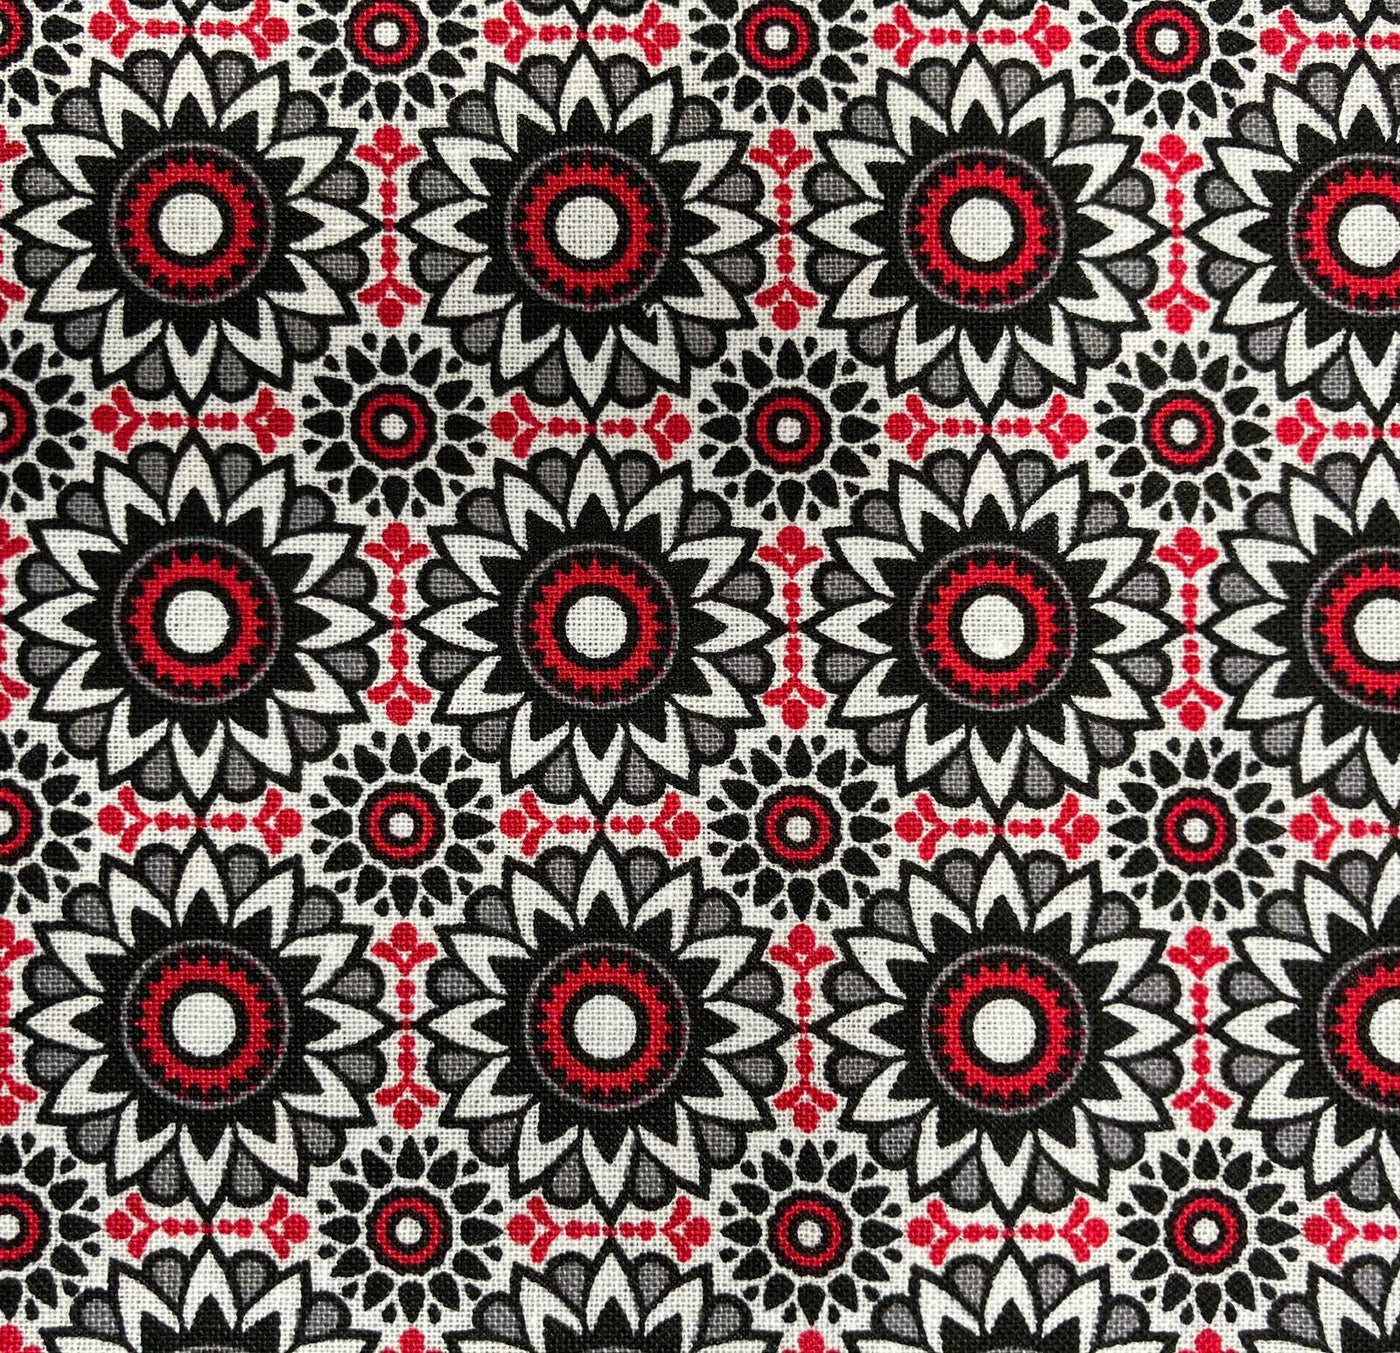 Balinese Repeating Flower - David Textiles -100% Cotton Fabric